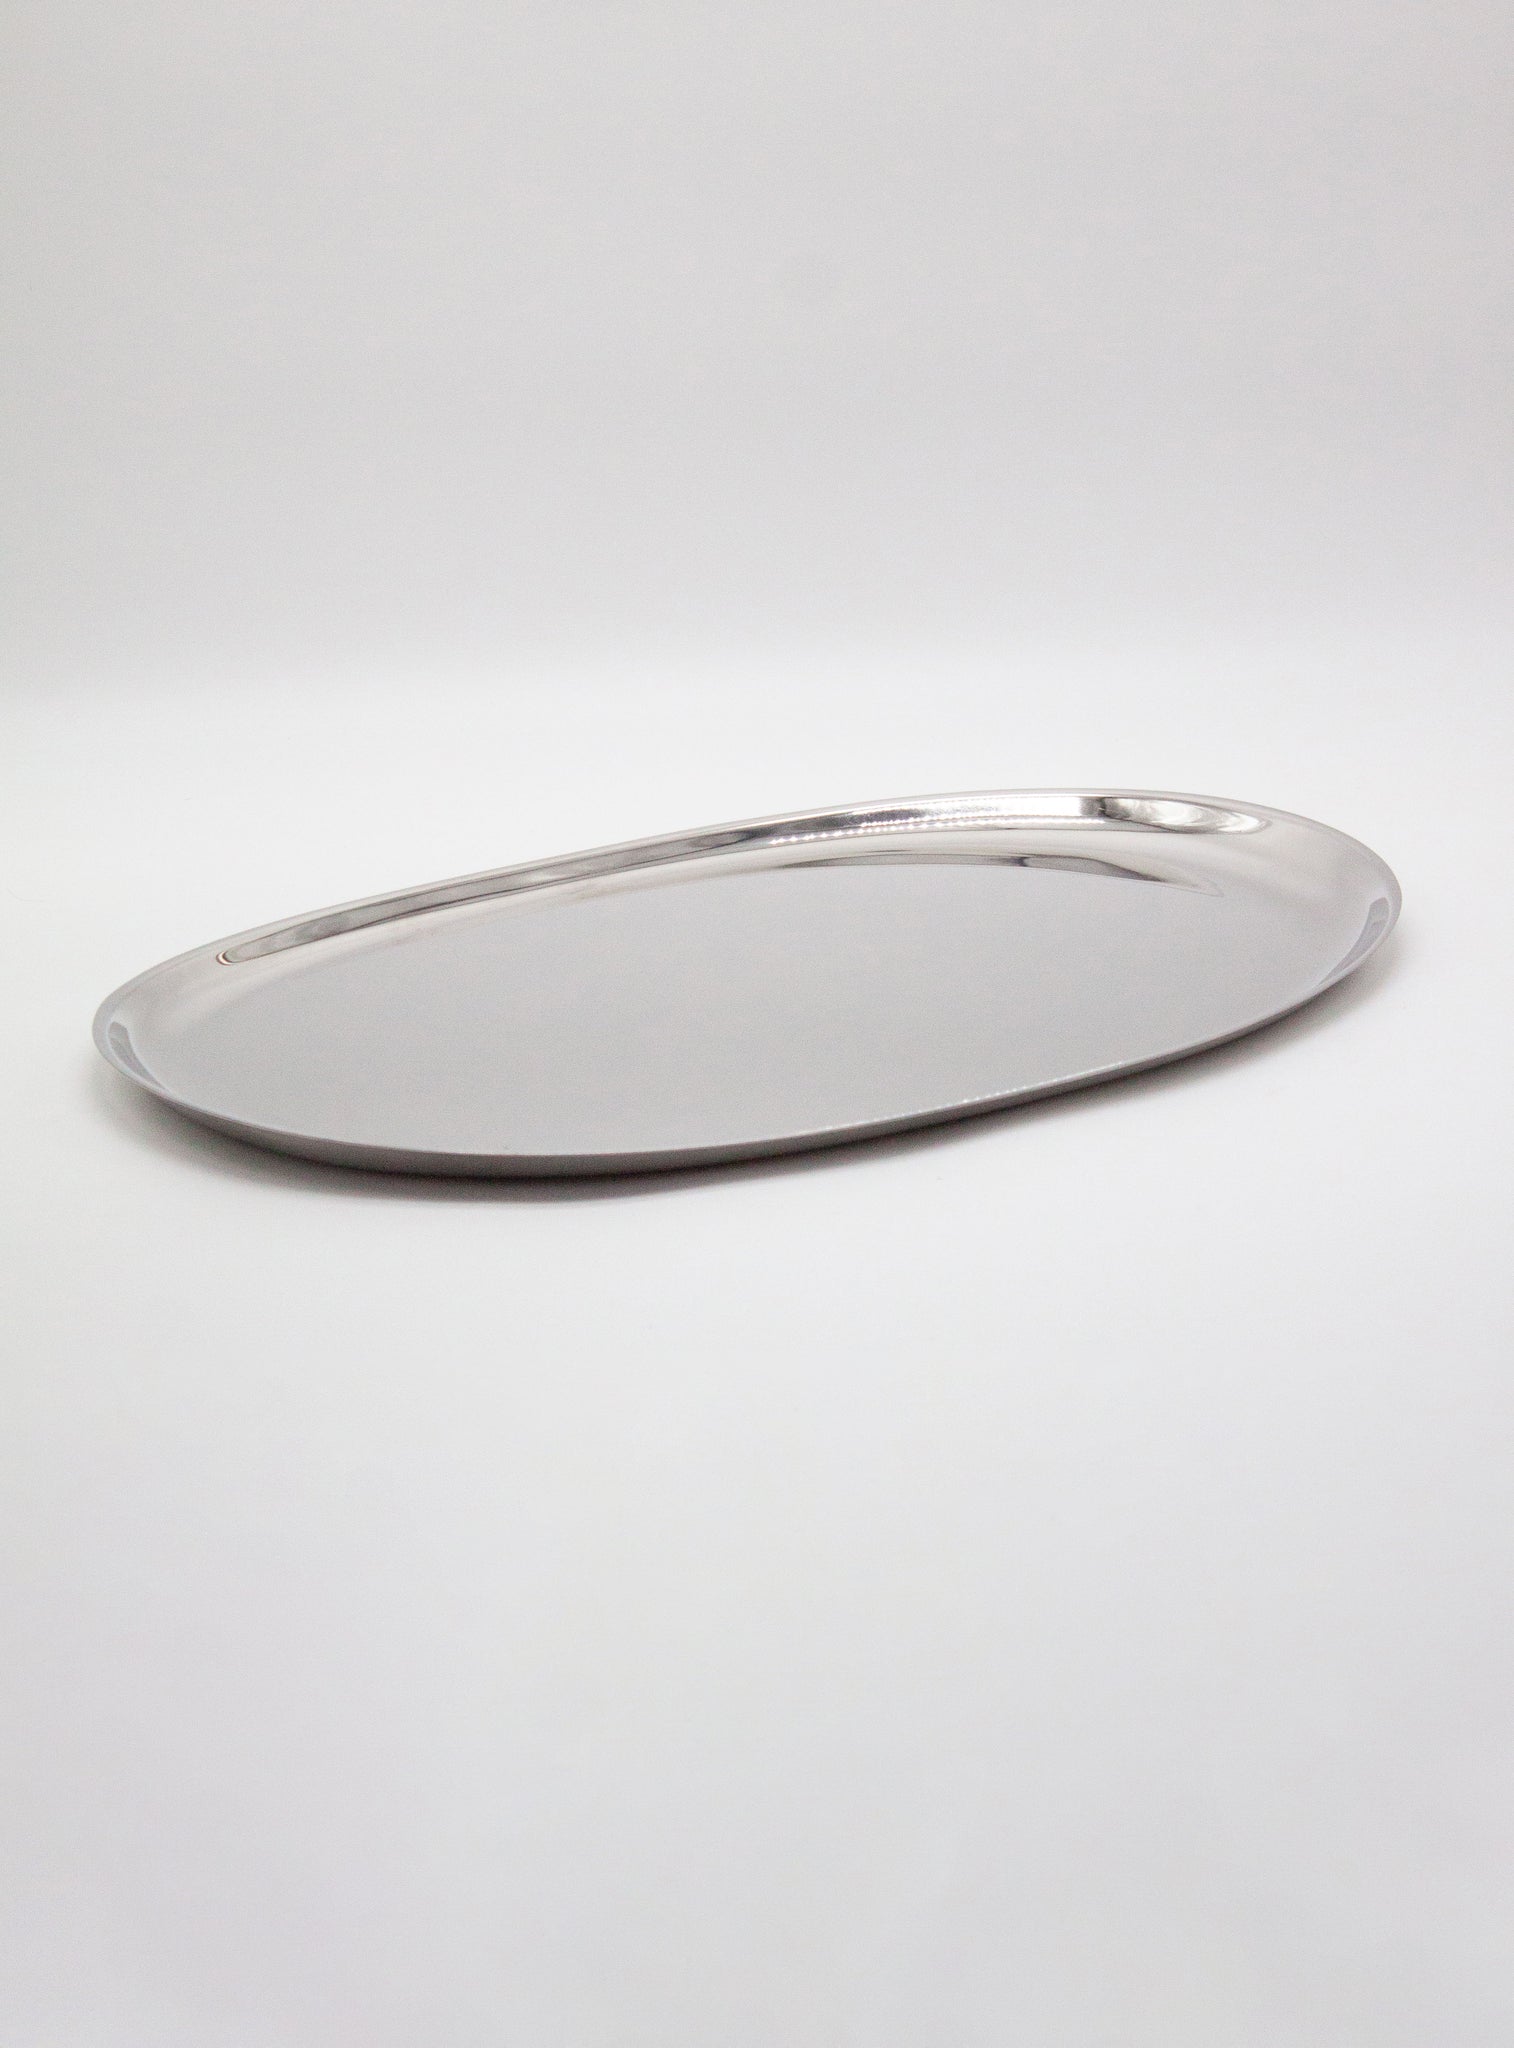 AMC Italy Stainless Steel Serving Tray